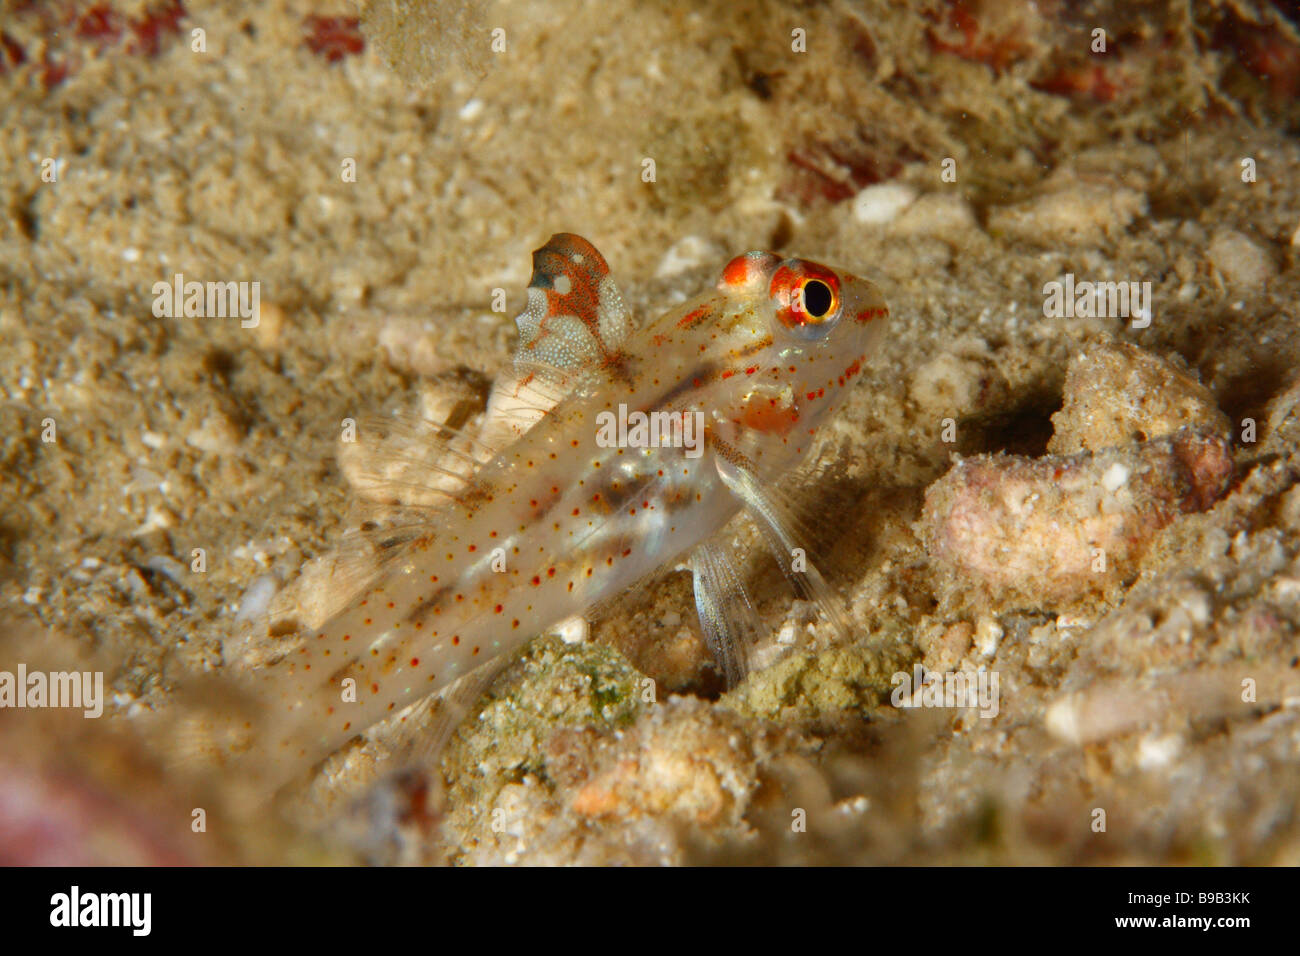 A close-up shot of a signalfin goby fish with bright red spots and translucent body perched in sand at base of a coral formation Stock Photo